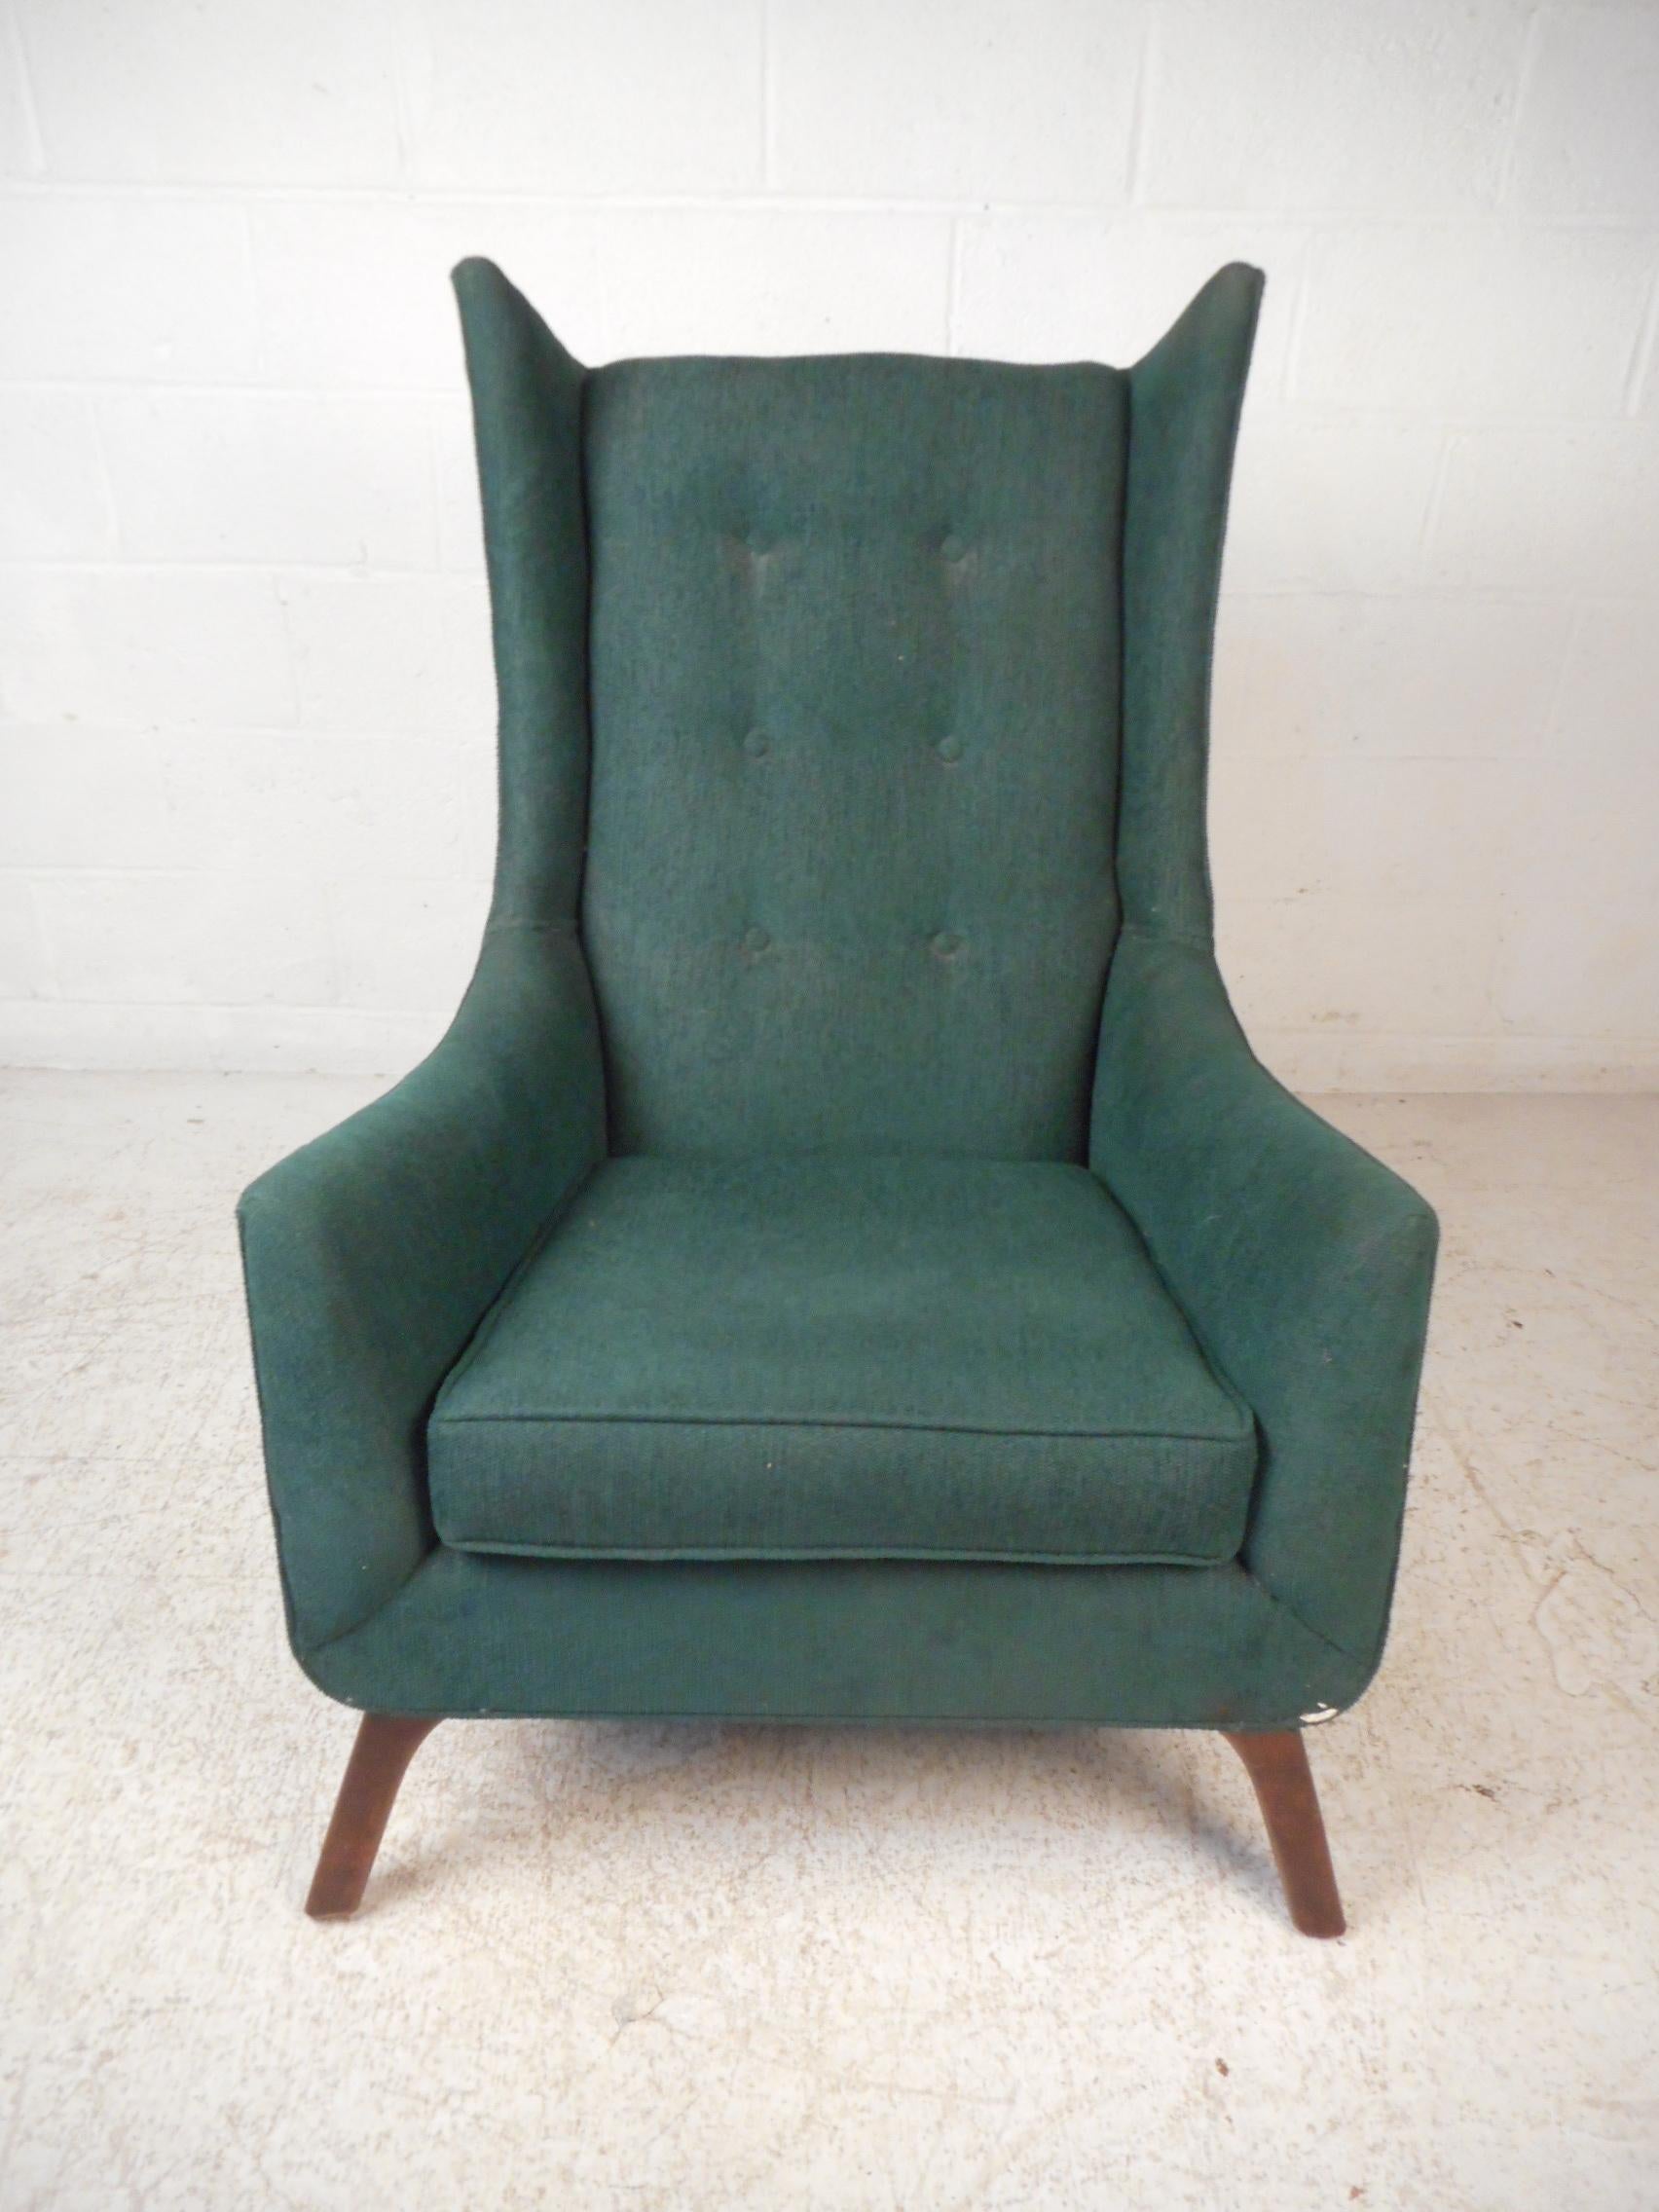 Impressive midcentury wingback chair. Tall backrest with accented sides giving this piece a striking visual profile. Vintage green upholstery with tufted backrest. Great addition to any modern interior's seating arrangement. Please confirm item